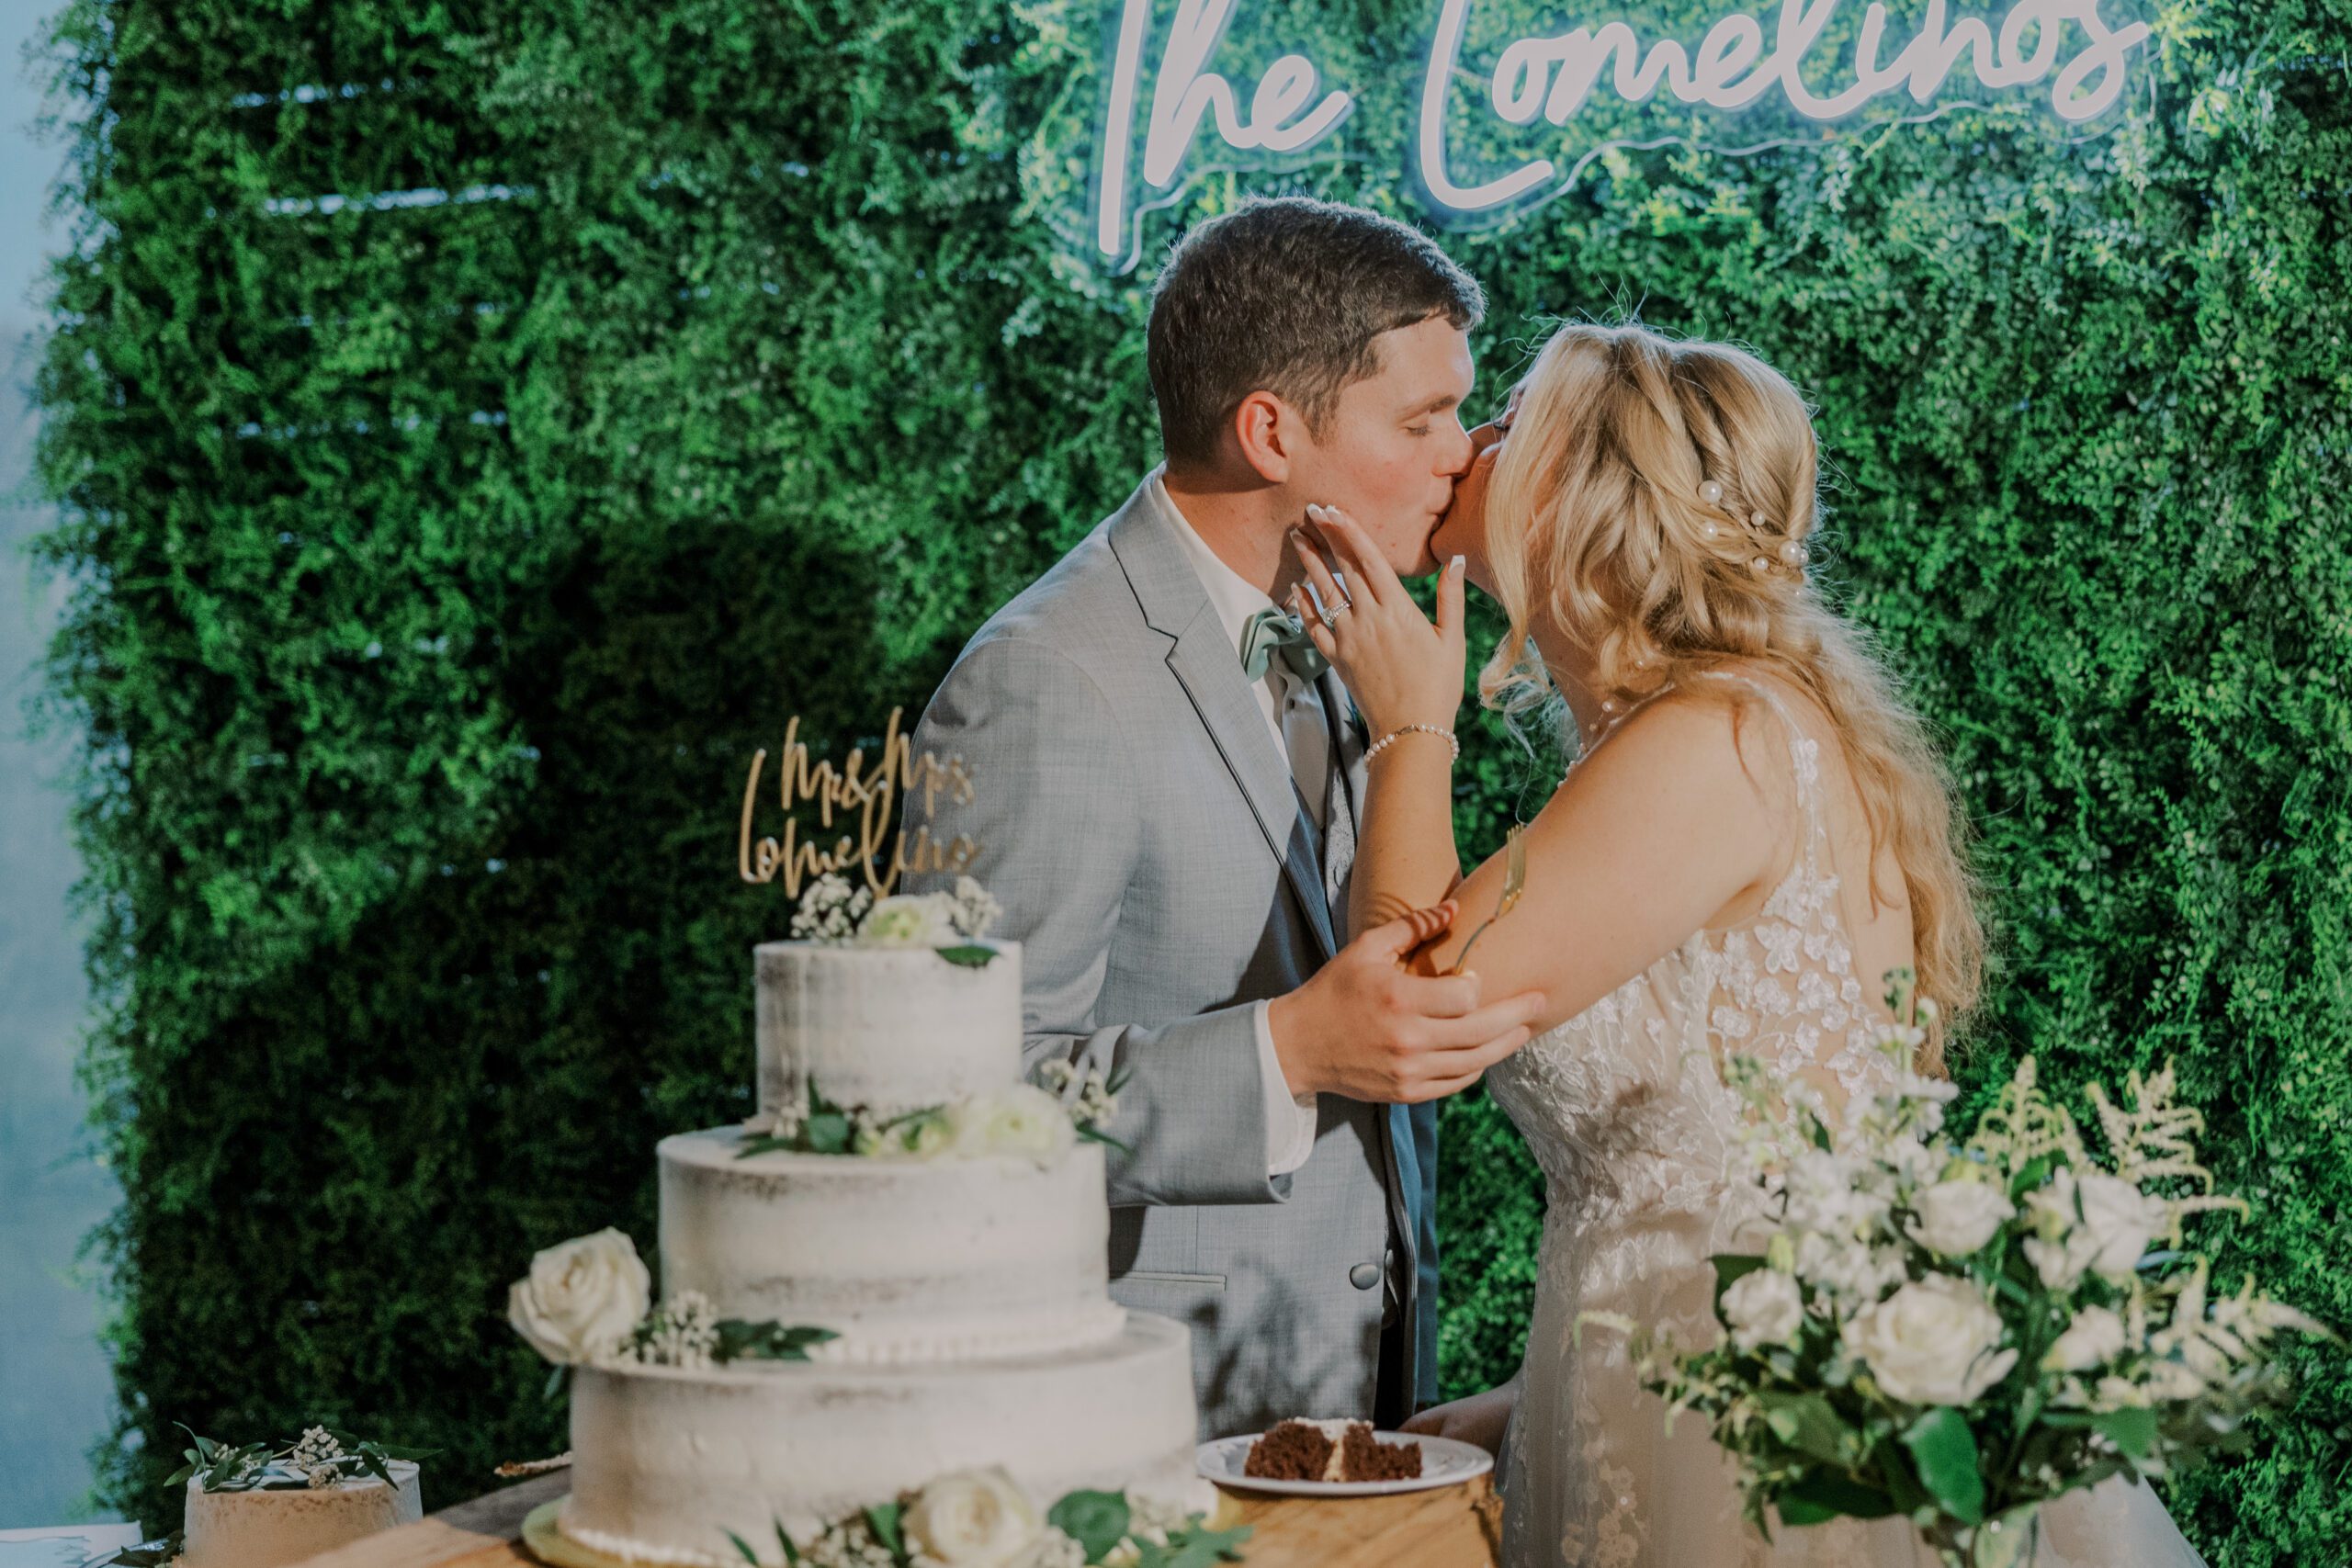 Bride and groom kissing next to their wedding cake at their arbor haven fall wedding, greenery wall with light up last name sign pictured behind them